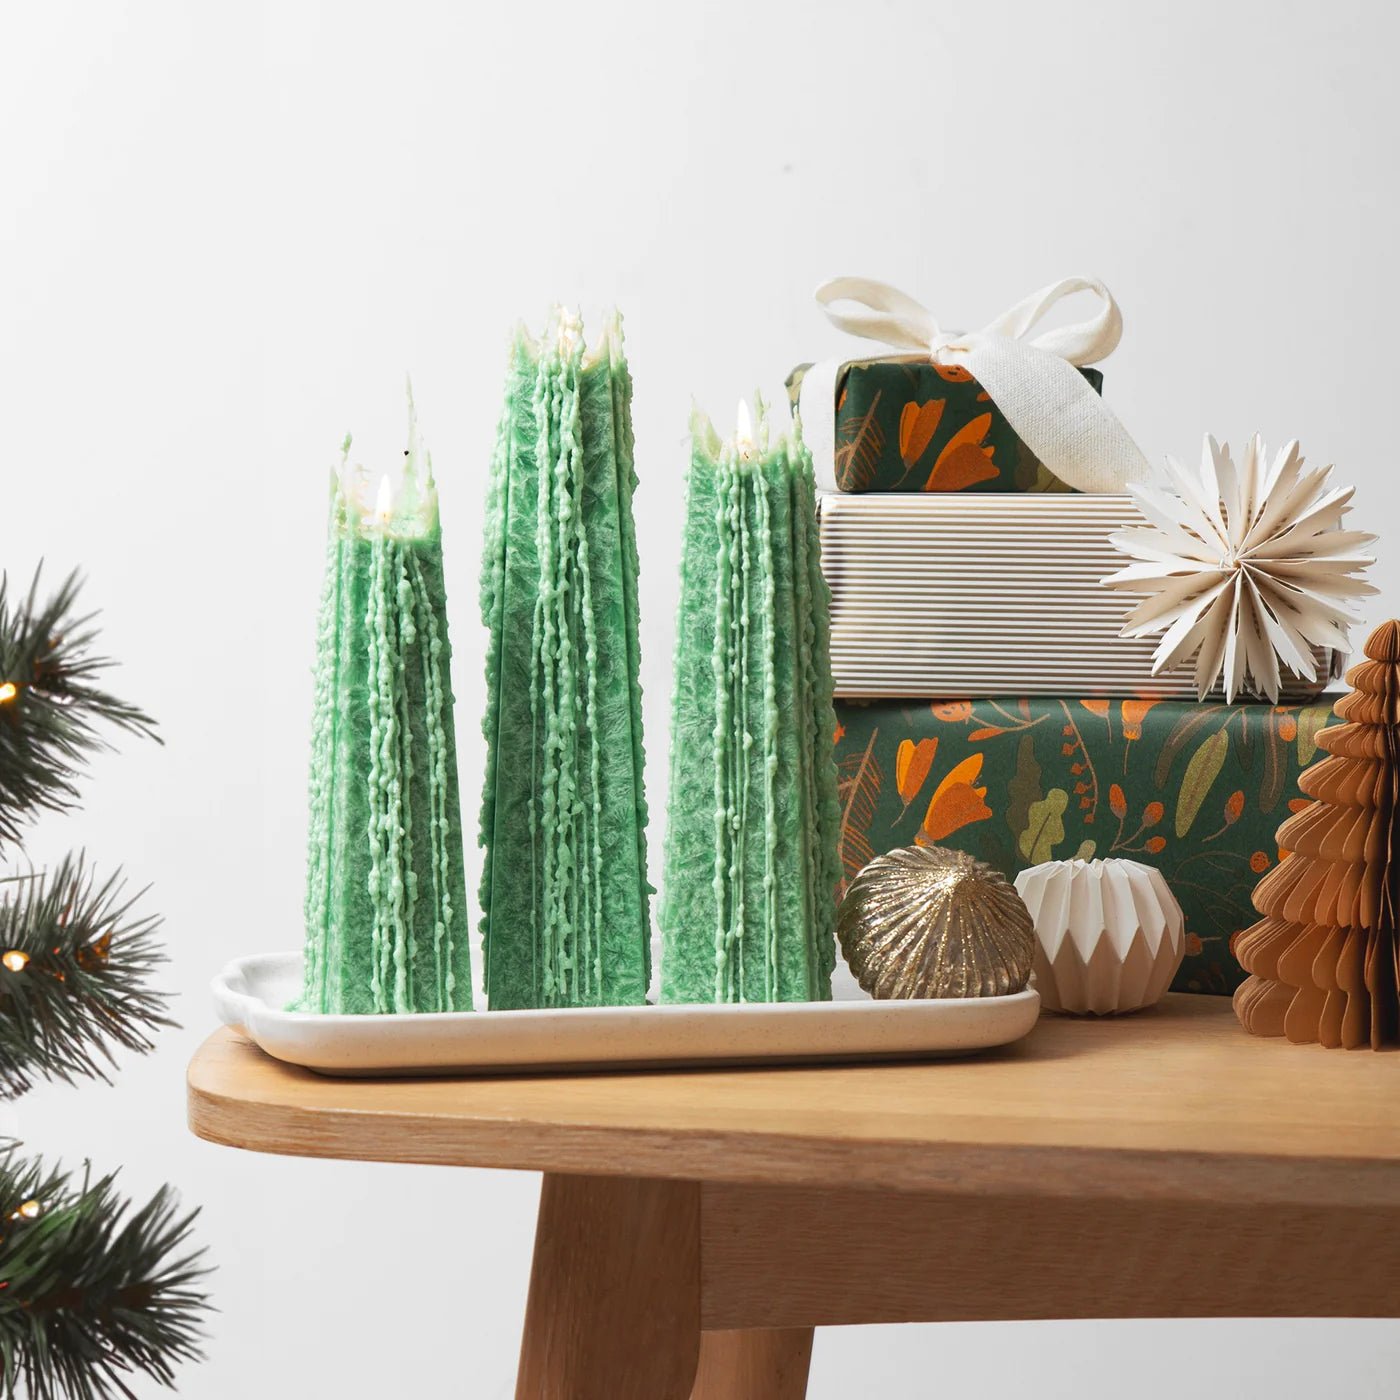 Living Light Icicle Candle - Festive Pine - The Flower Crate